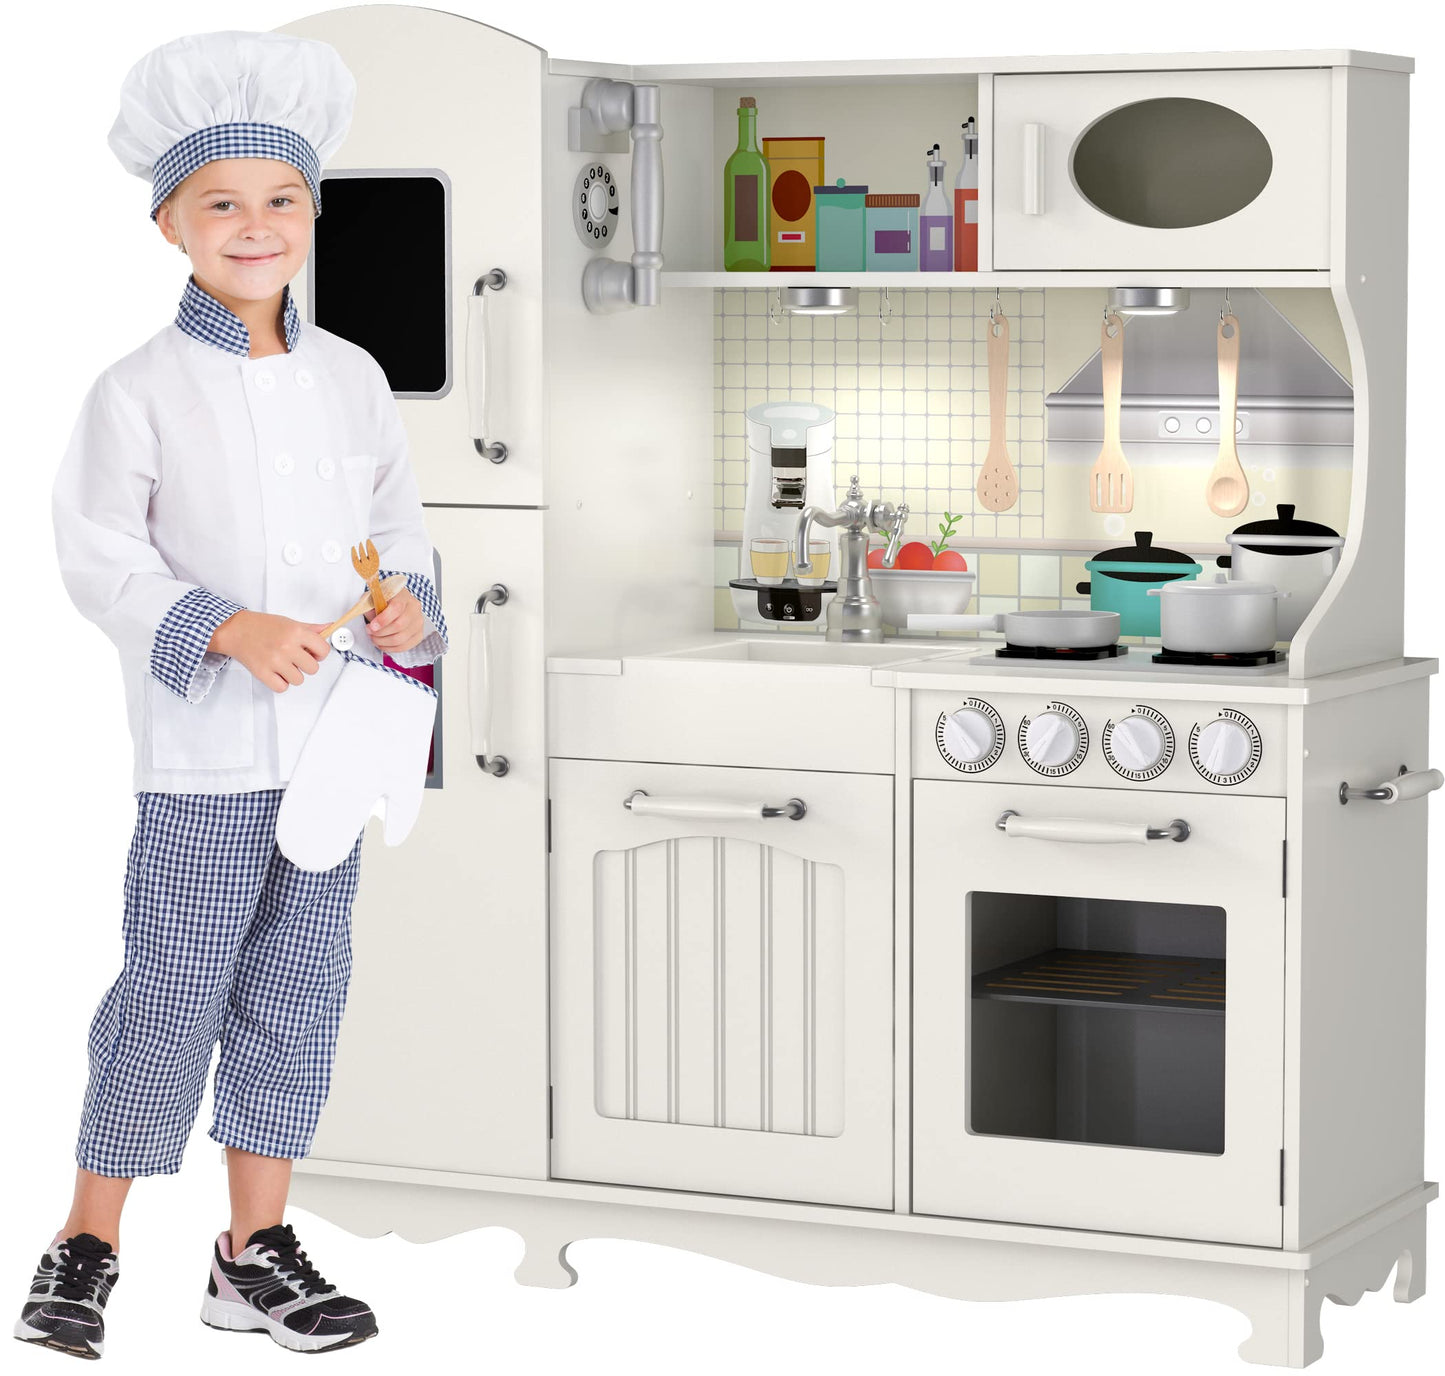 Play Kitchen - Wooden Kitchen Playset for Toddlers & Big Kids - Mini Pretend Toy Kitchenette for Boys & Girls - Vintage Phone, Refrigerator & Ice Maker, Sink, Pots, Pans, Cooking Utensils - Ages 3-8